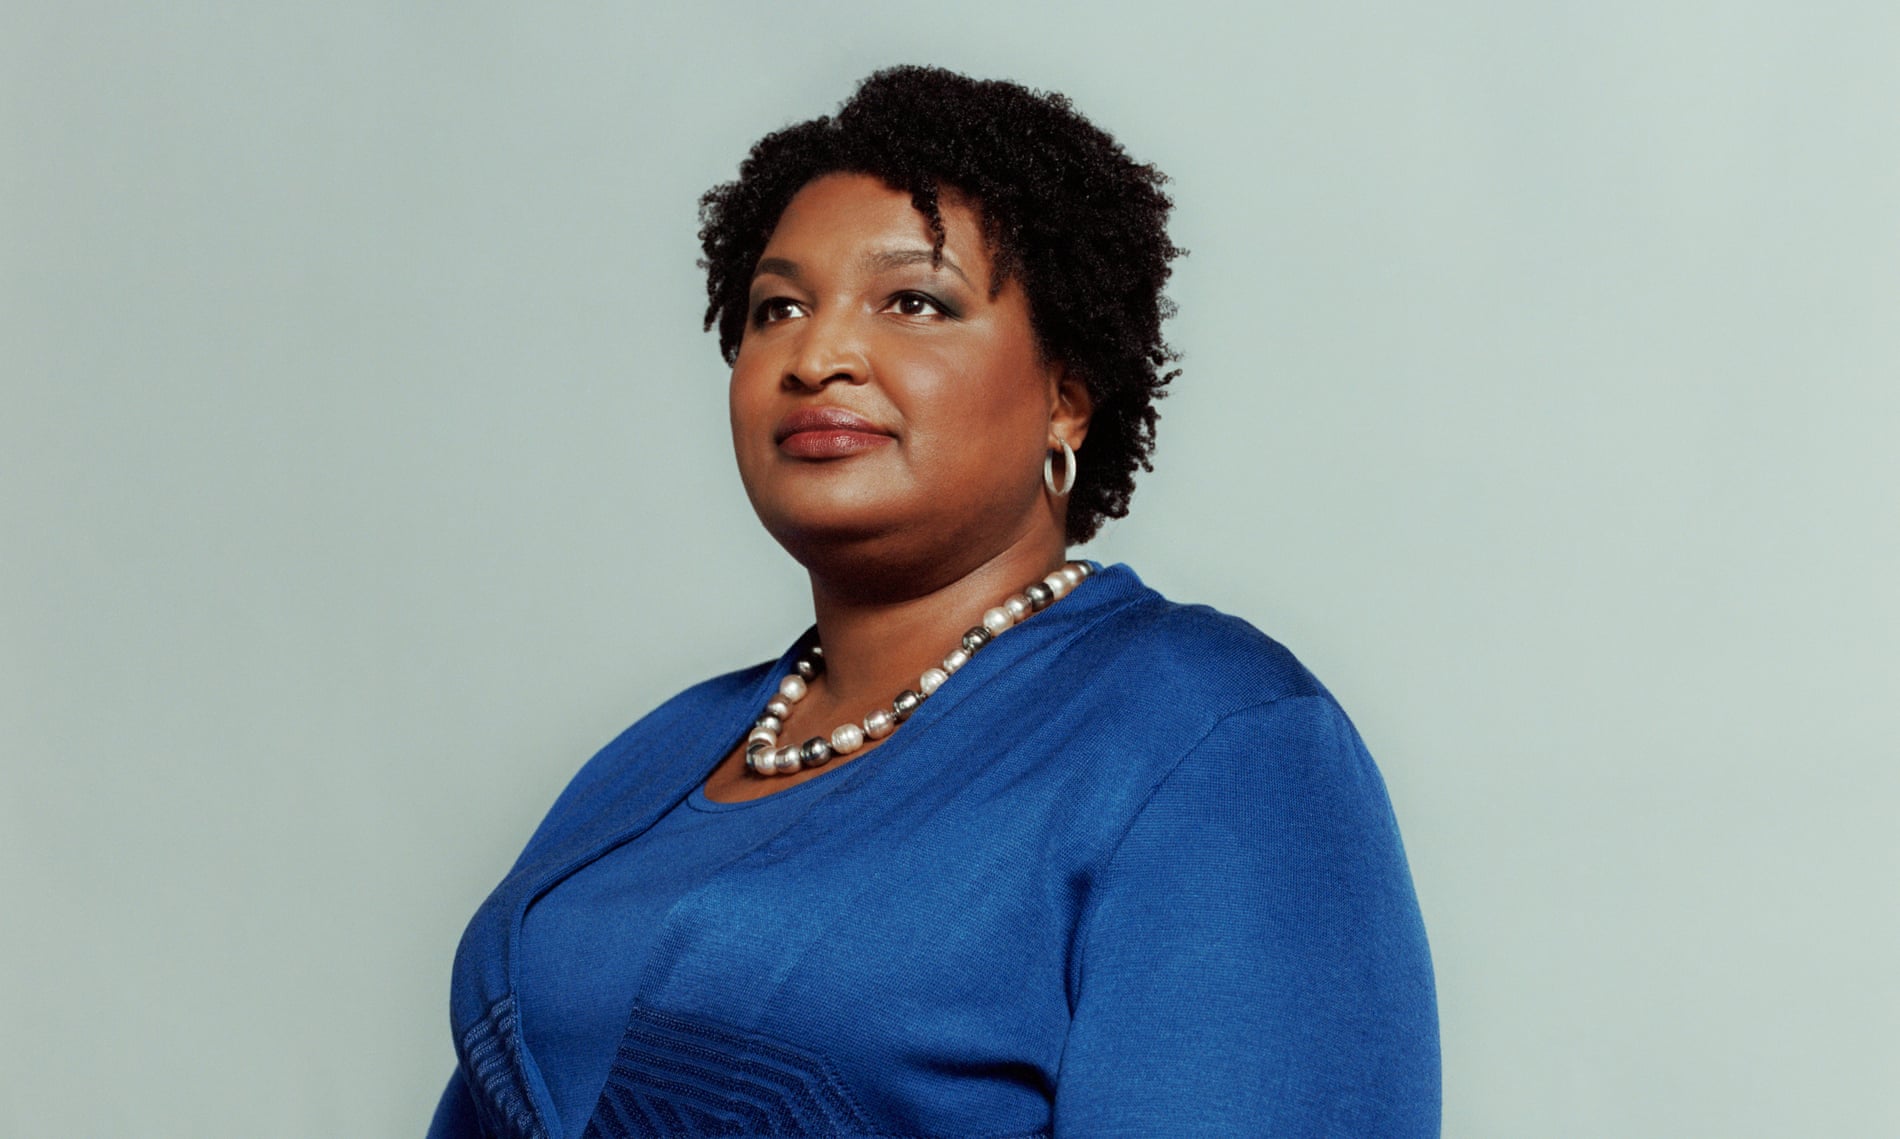 Stacey Abrams: ‘I am not convinced at all that we will have free and fair elections unless we work to make it so.’